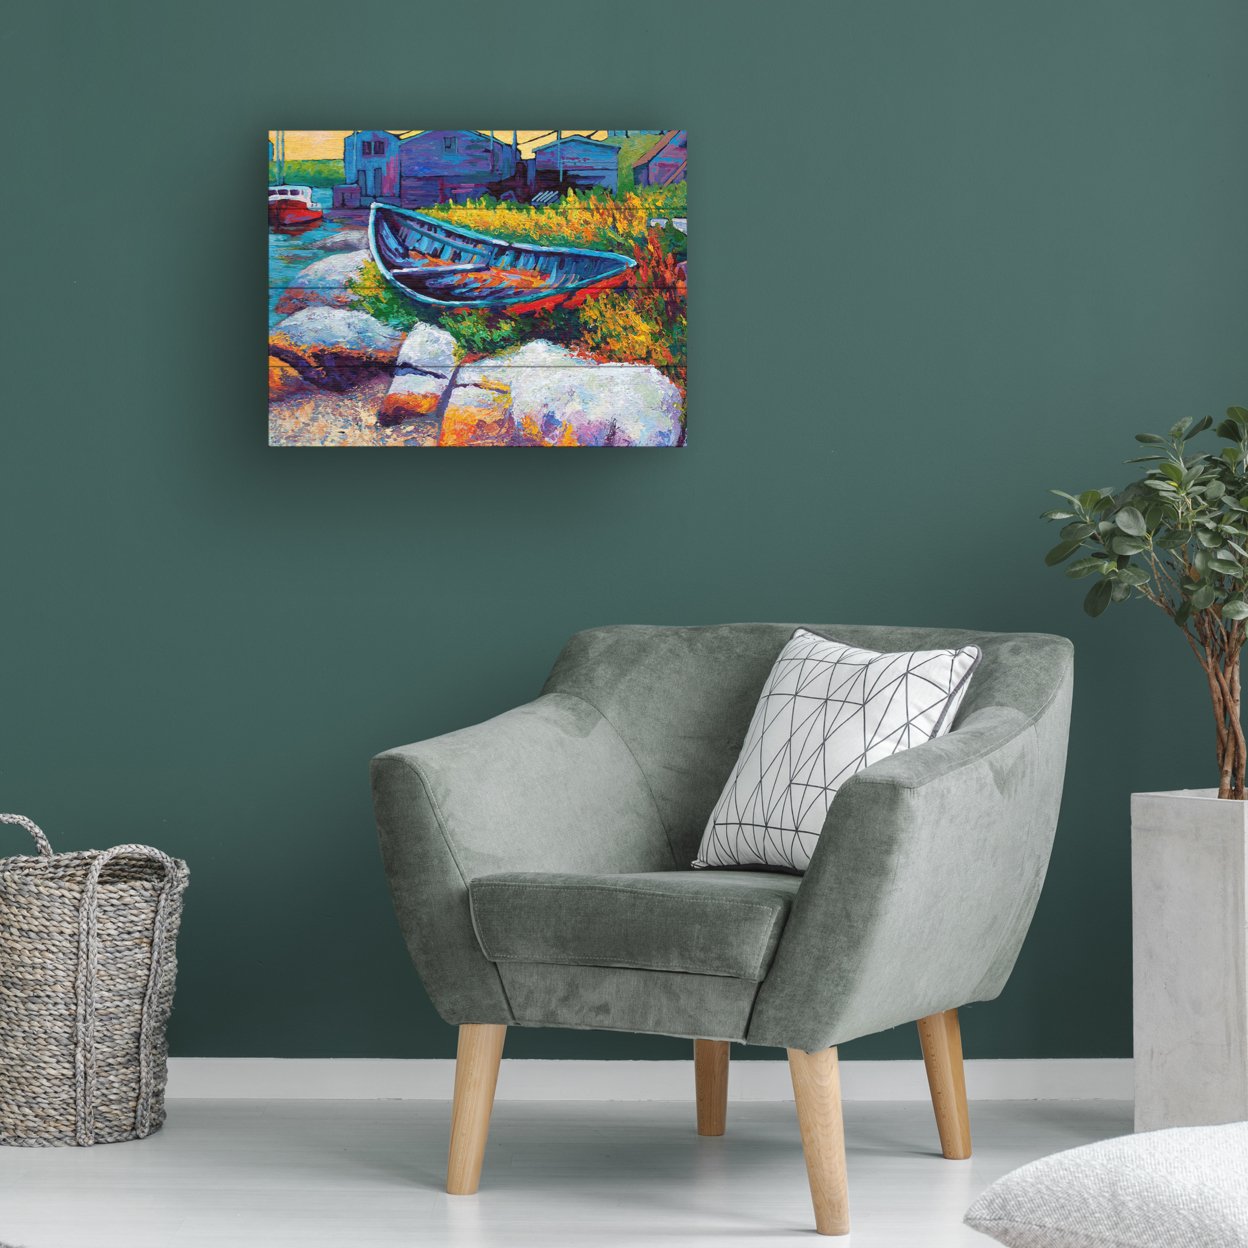 Wall Art 12 X 16 Inches Titled Judy East Coast Boat Faa Ready To Hang Printed On Wooden Planks